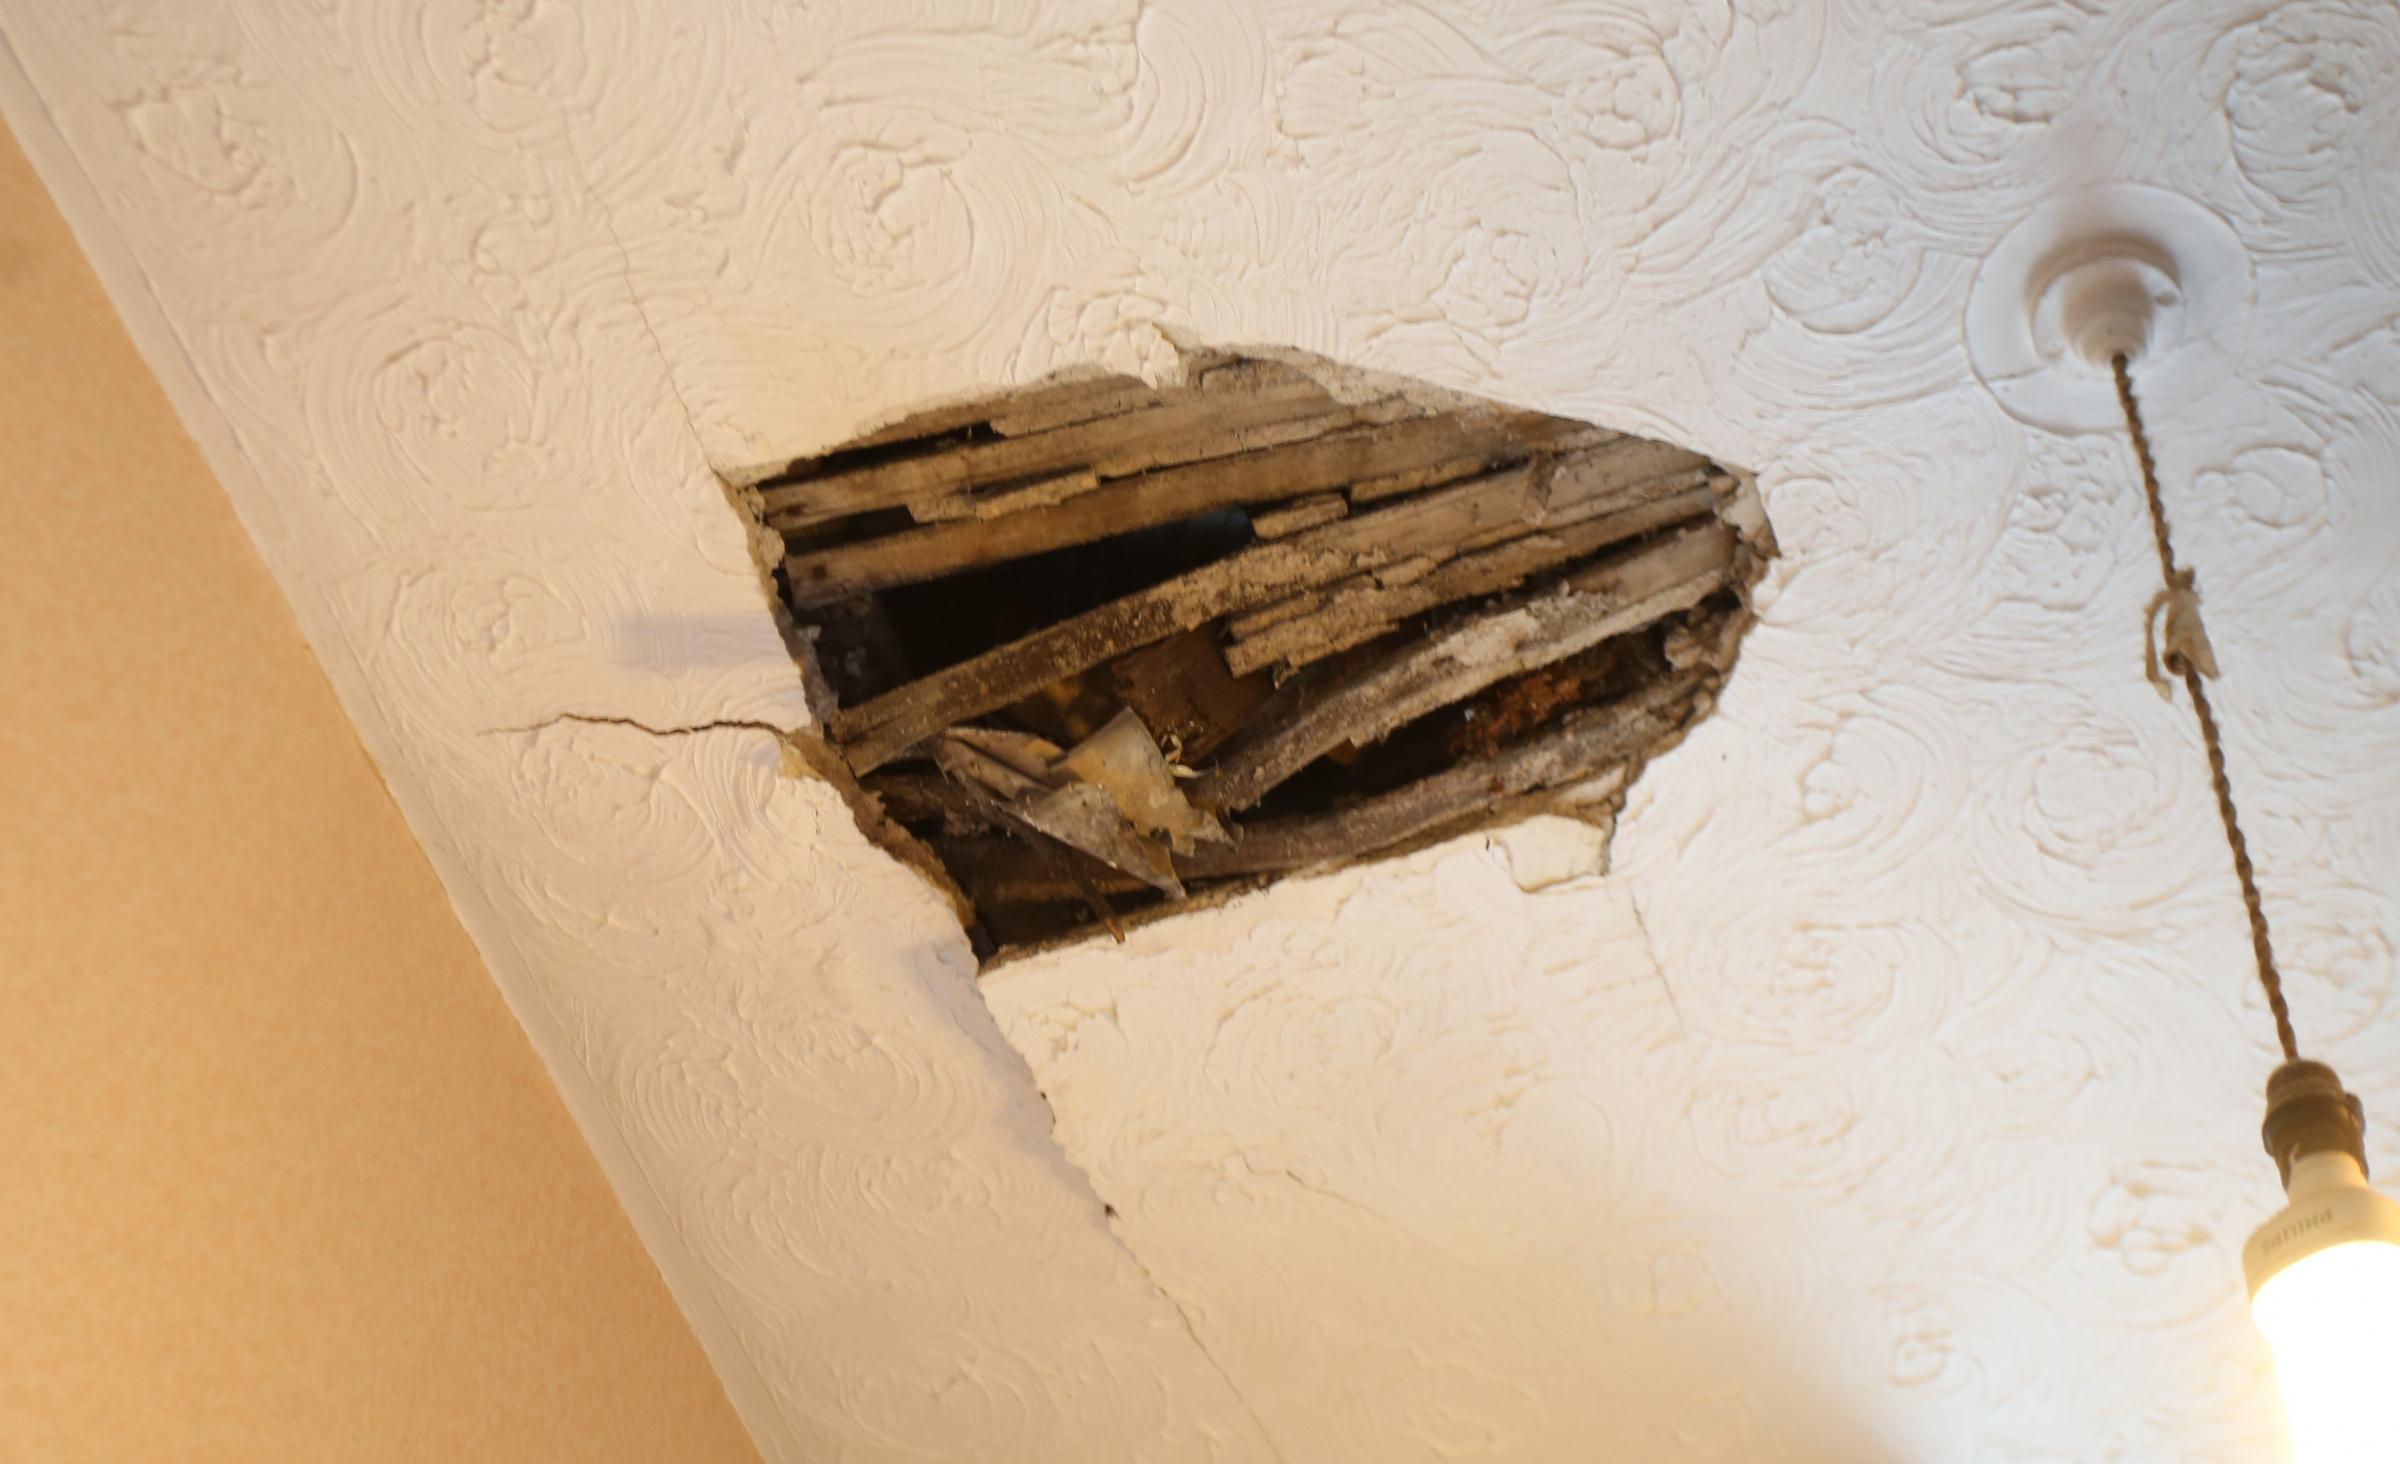 Mr Riddell ceiling collapse in their Hope Street home..